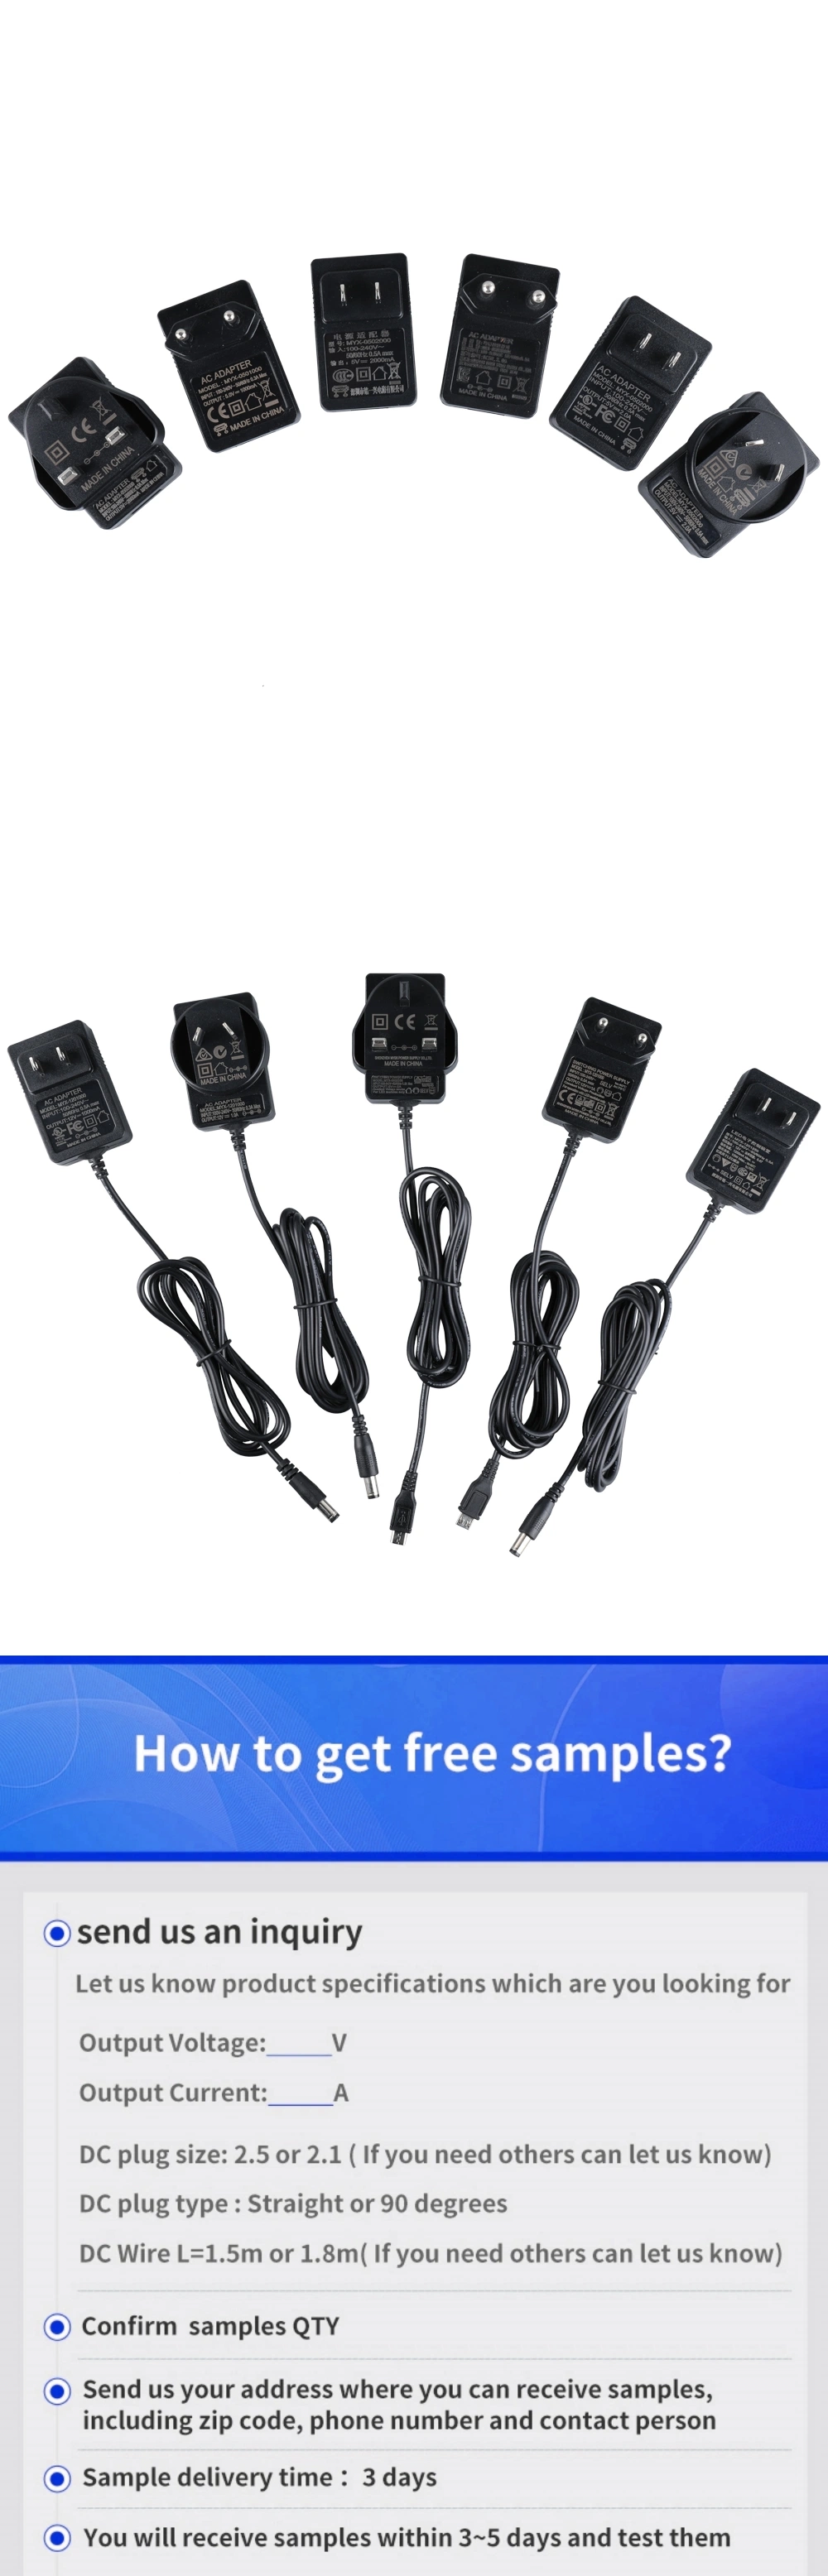 5V 12V 24V 48V 500AMP 1A 2A 4A Interchangeable Power Adapter Factory Pirce Free Sample Power Adaptor Factory Manufacture Directly Supply 13 Years Factory